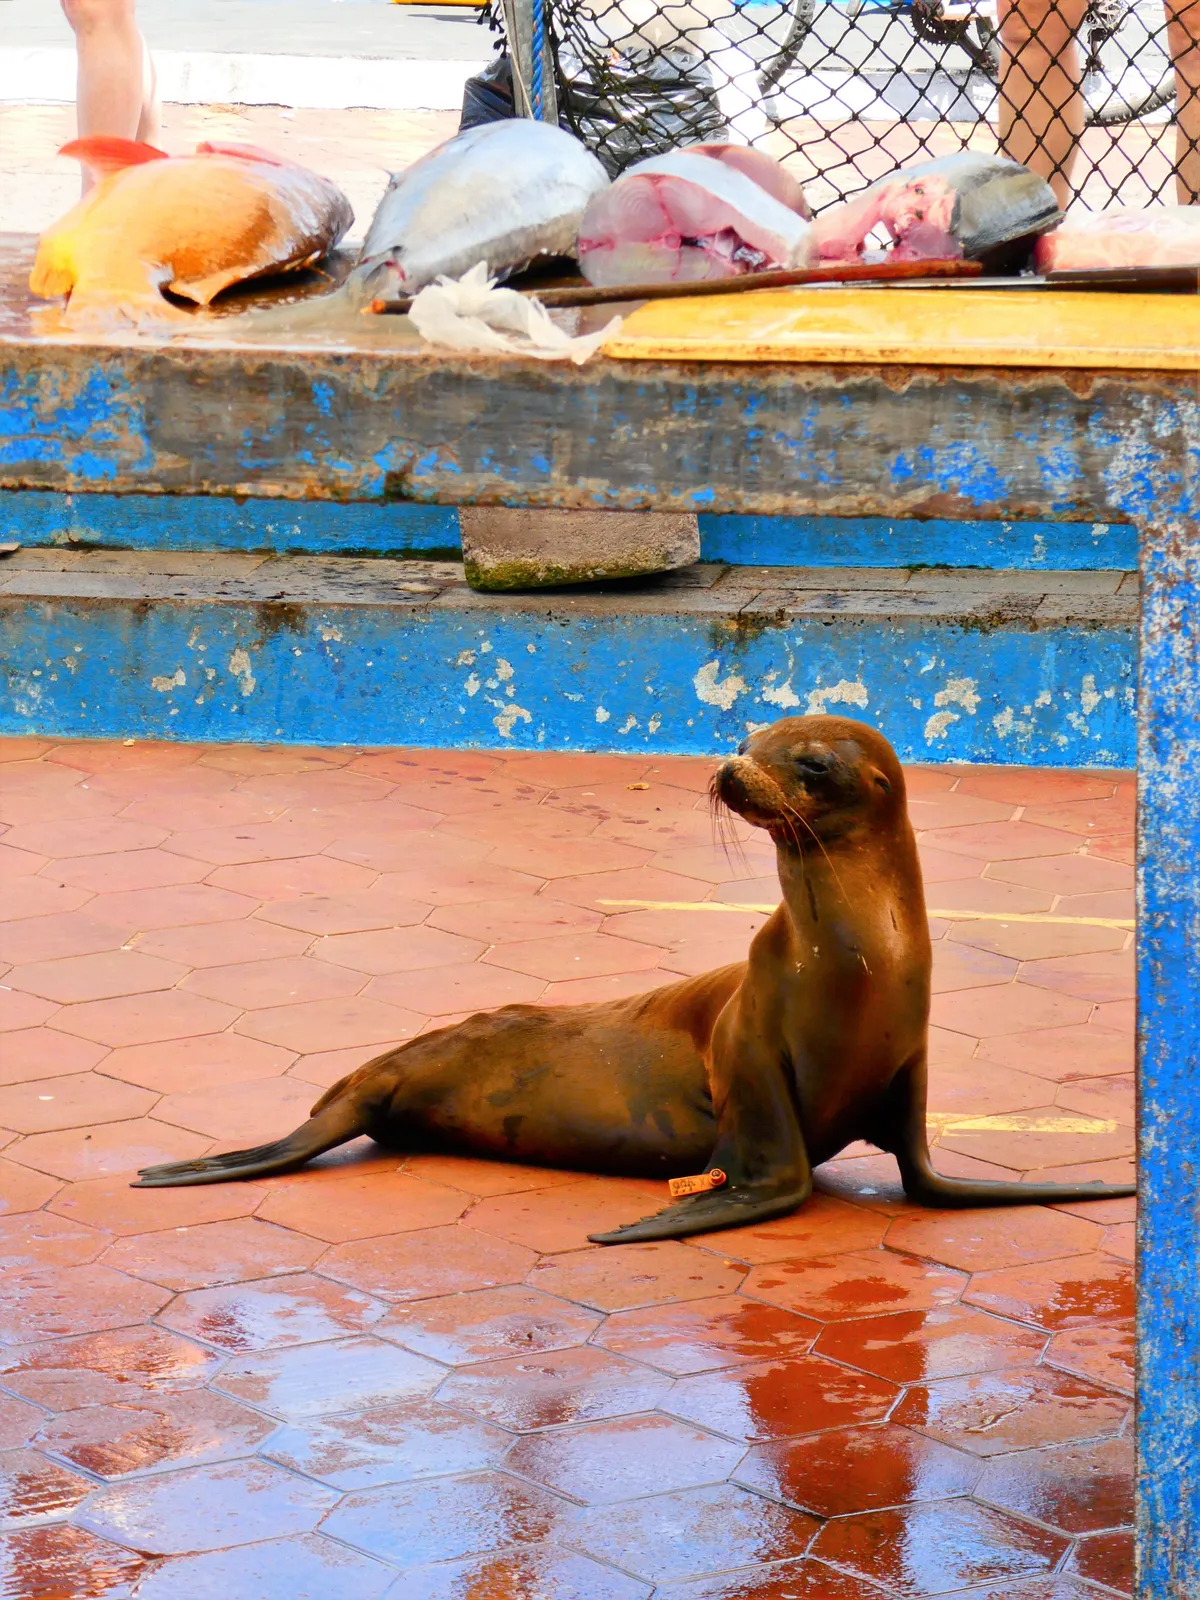 3rd place Urban Life: Galápagos sea lion on Isabela island. © Claire Herbaux/Galapagos Conservation Trust